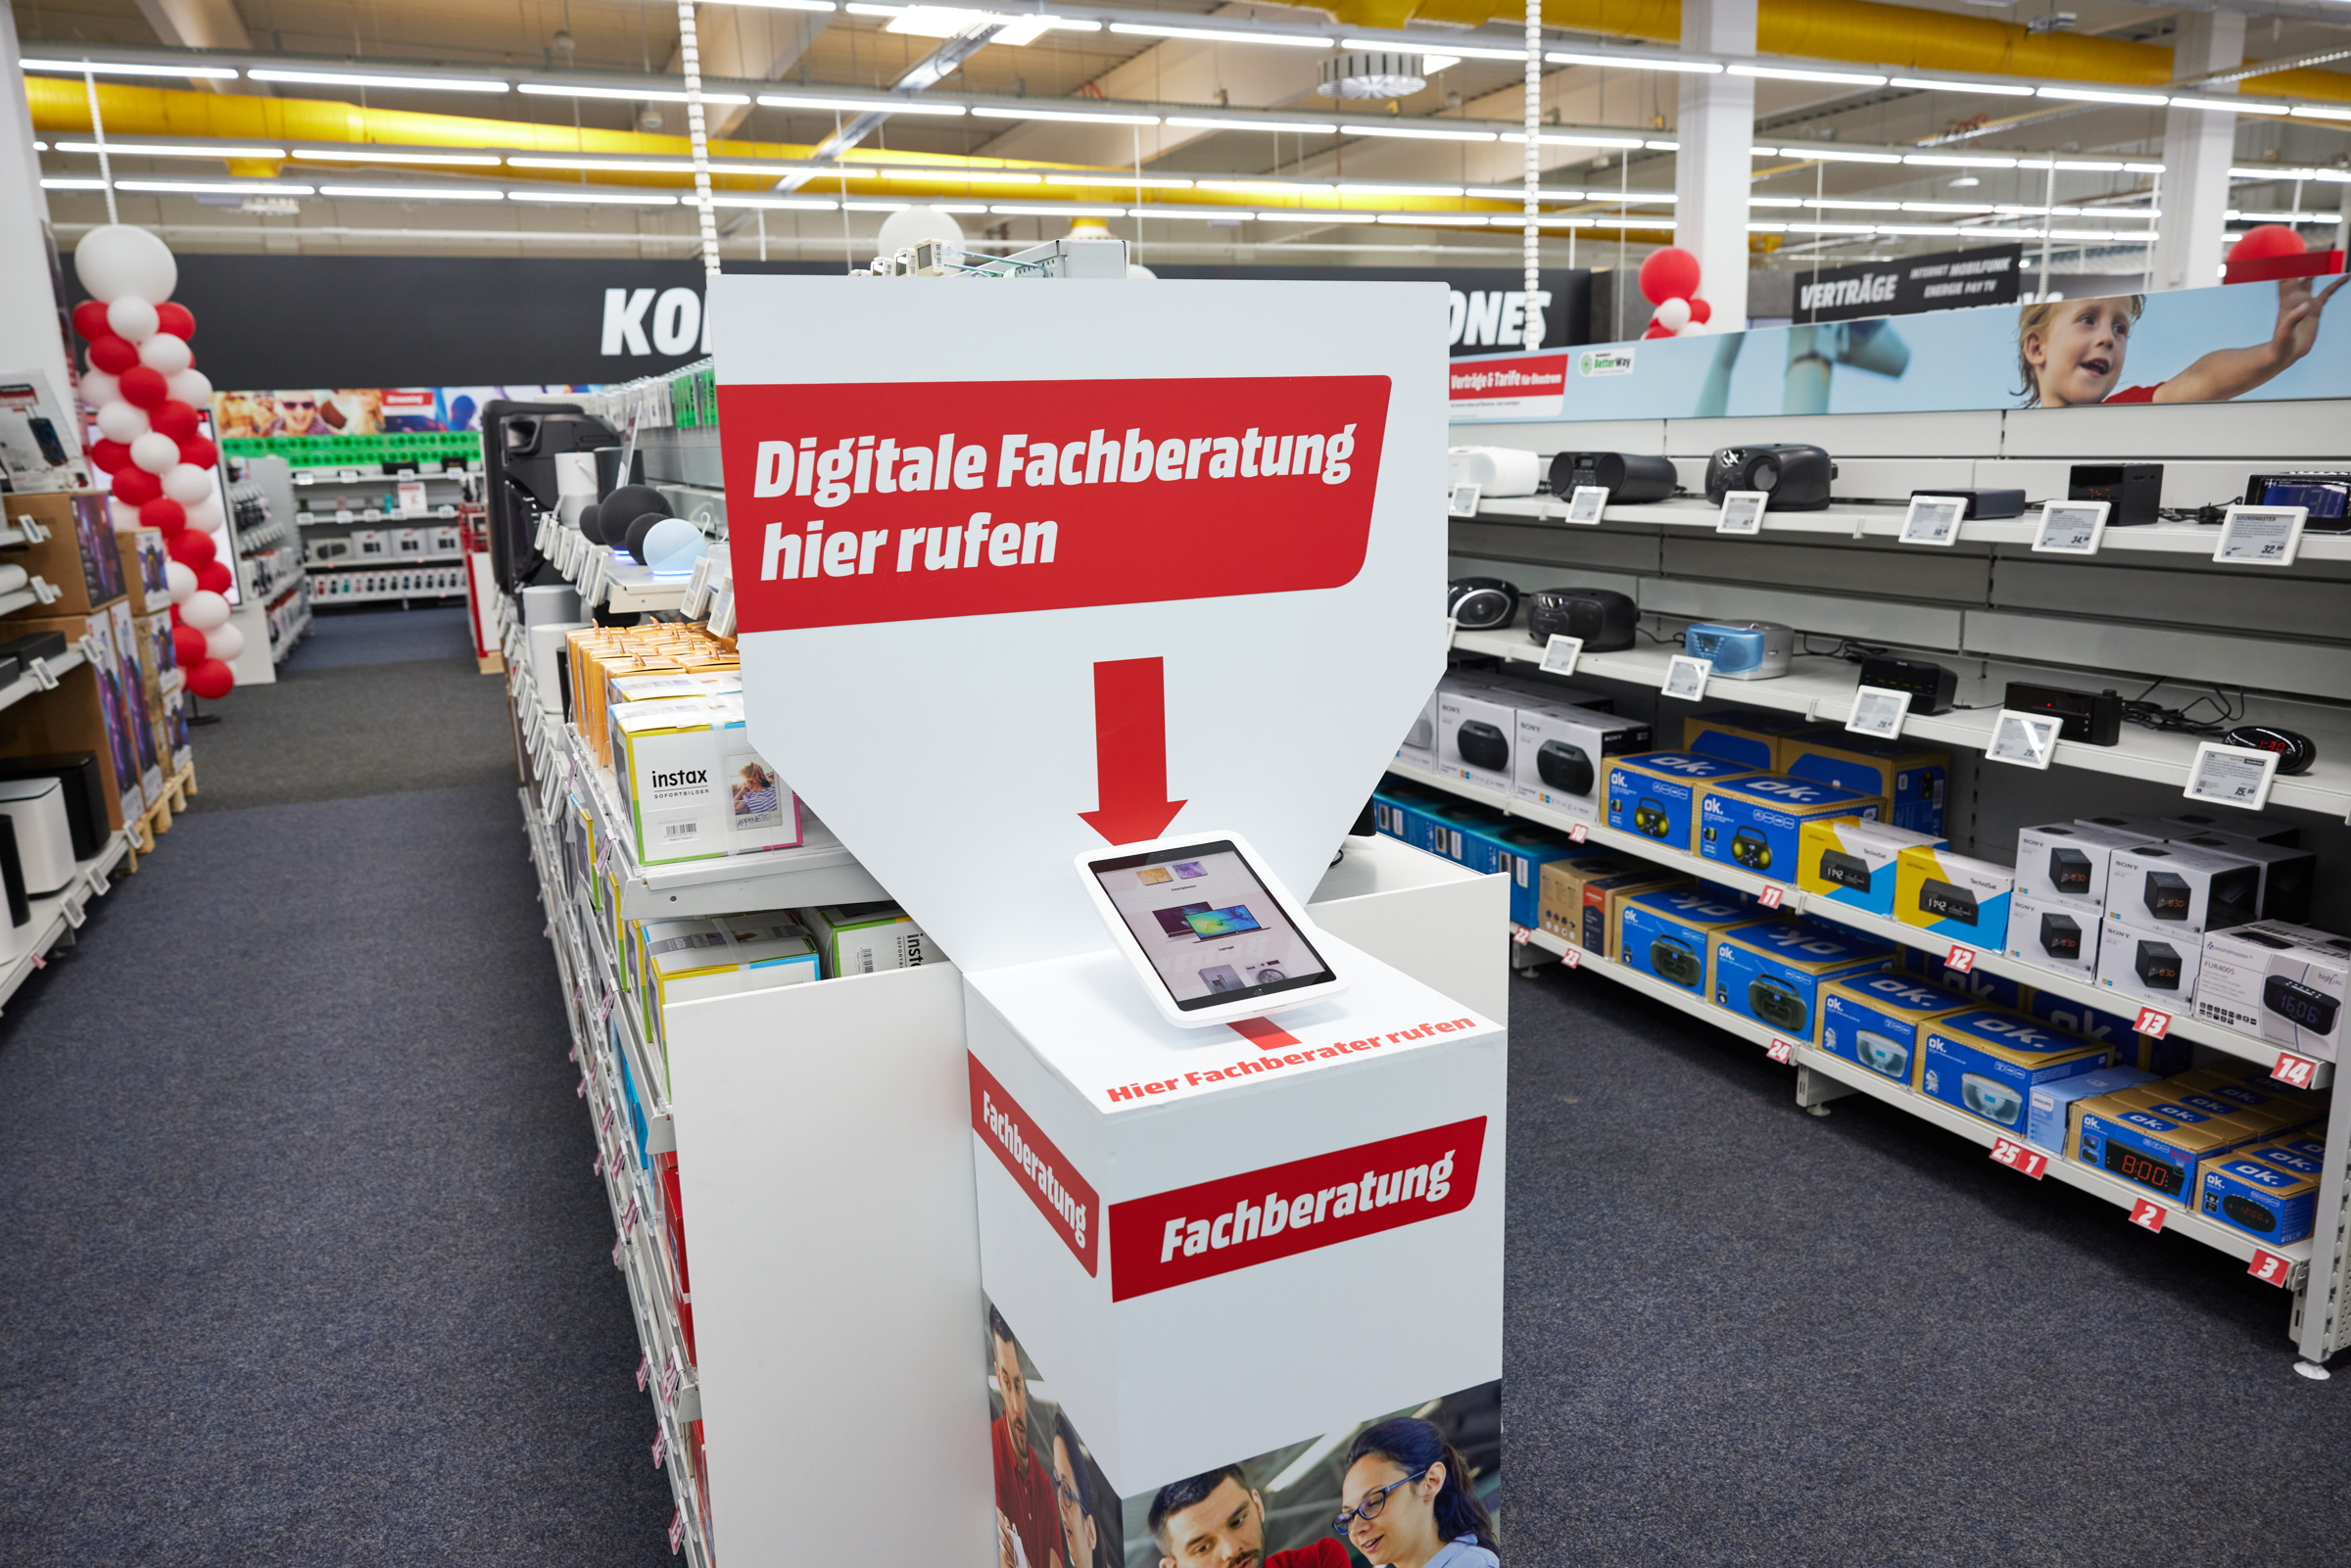 Qwintry - Media Markt is a German store, so all you orders should